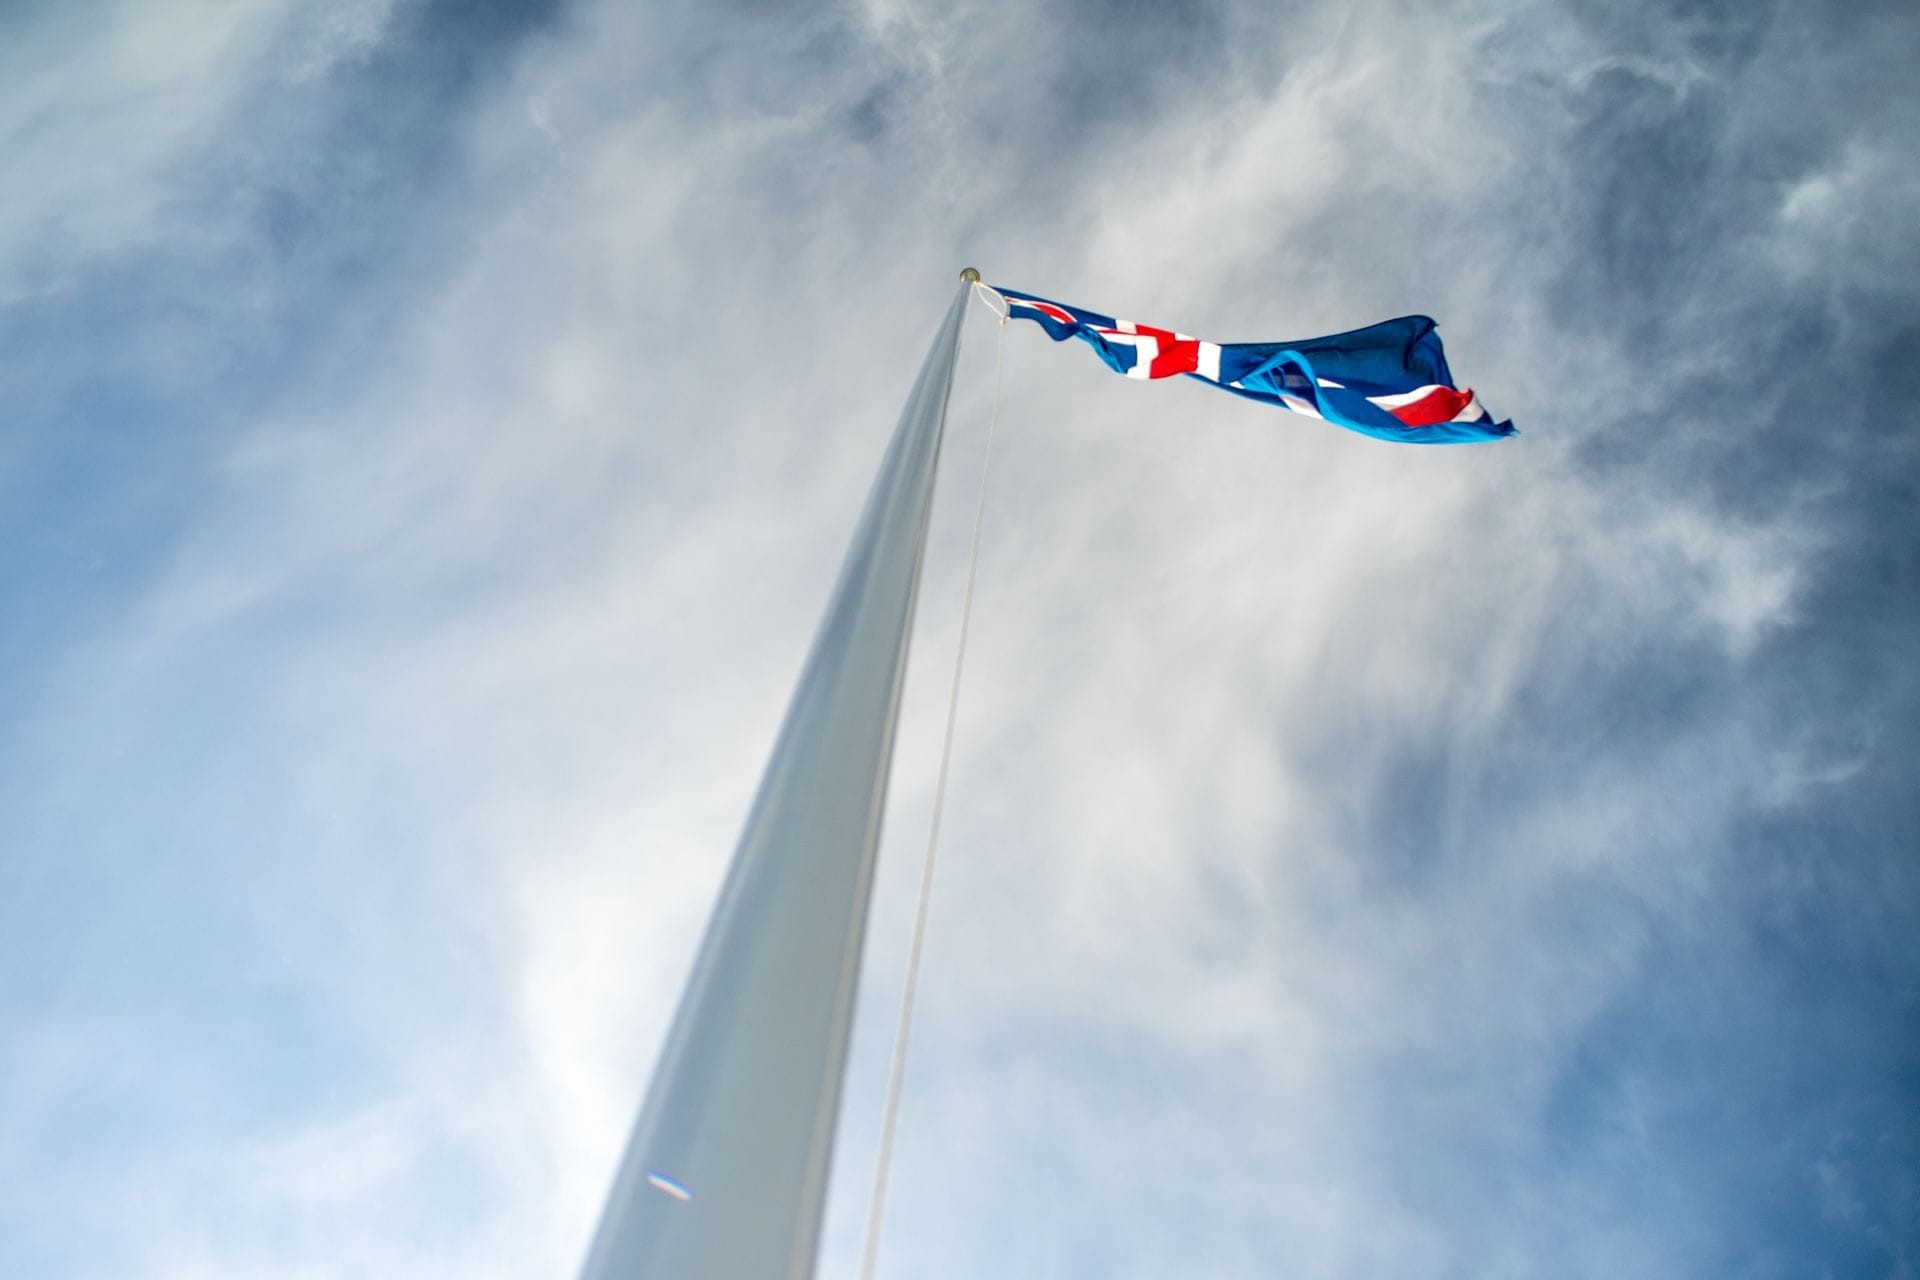 icelandic flag floating in the air, blue sky